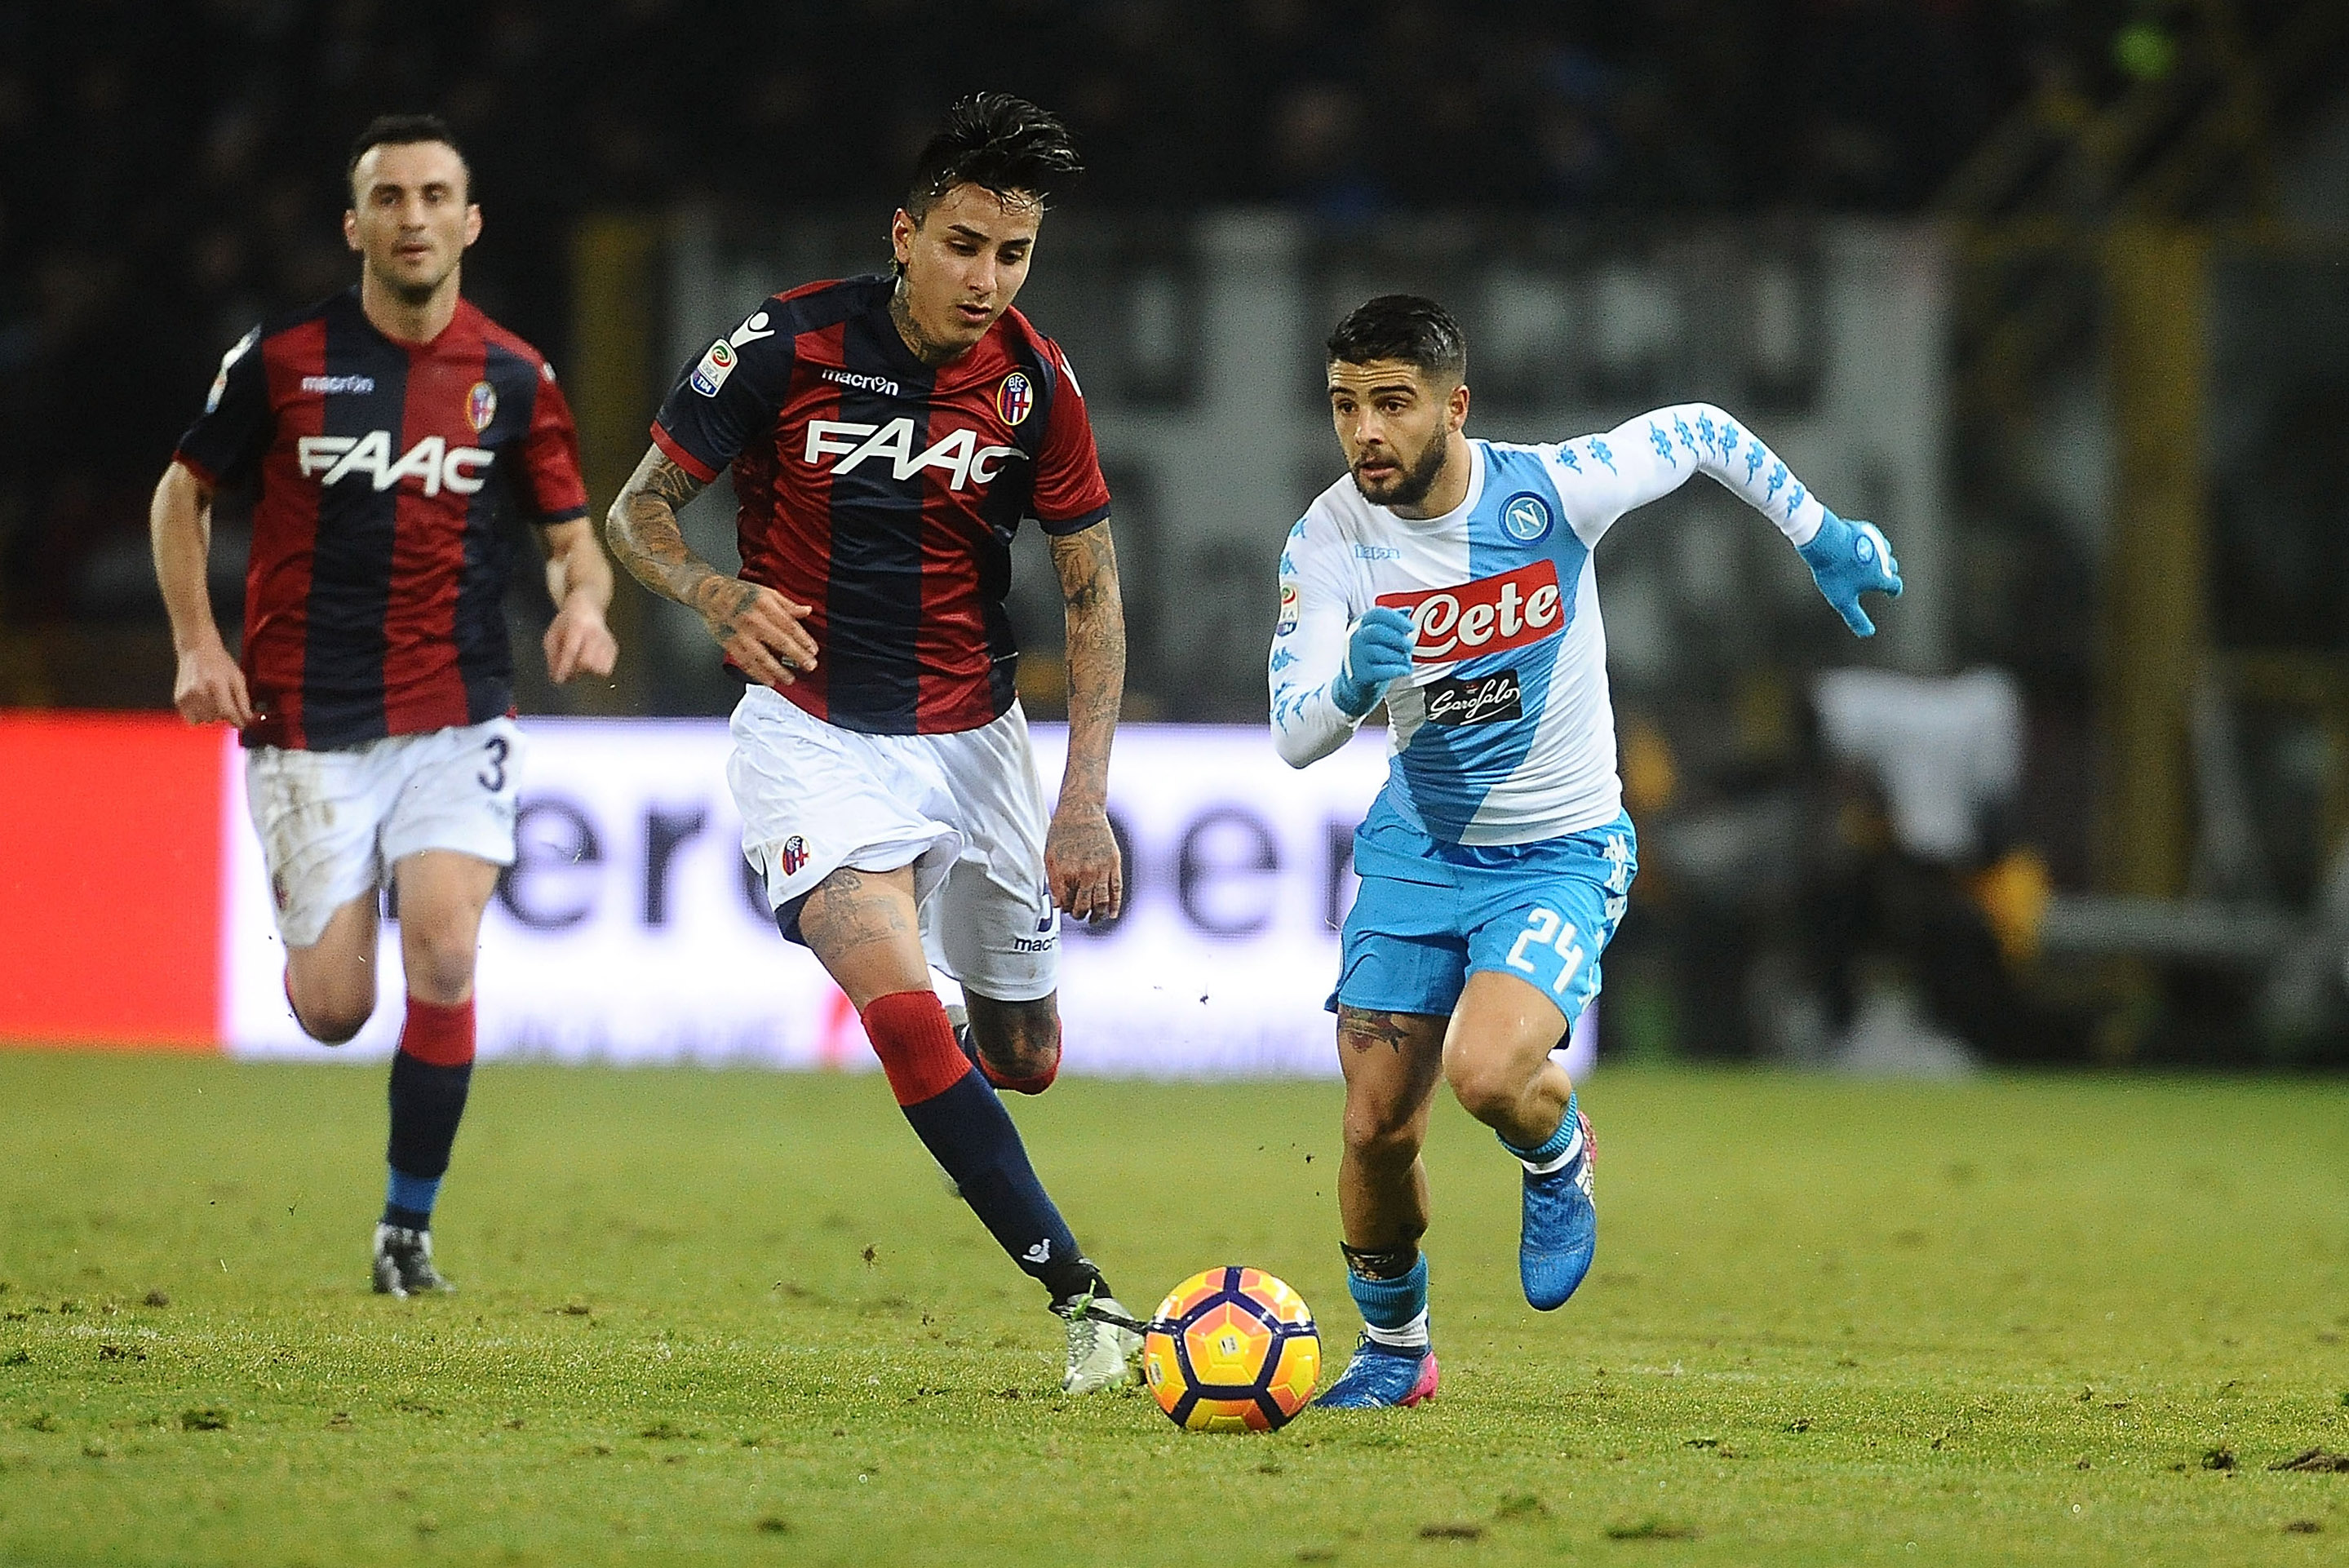 BOLOGNA, ITALY - FEBRUARY 04: Lorenzo Insigne # 24 of SSC Napoli in action  during the Serie A match between Bologna FC and SSC Napoli at Stadio Renato Dall'Ara on February 4, 2017 in Bologna, Italy.  (Photo by Mario Carlini / Iguana Press/Getty Images)